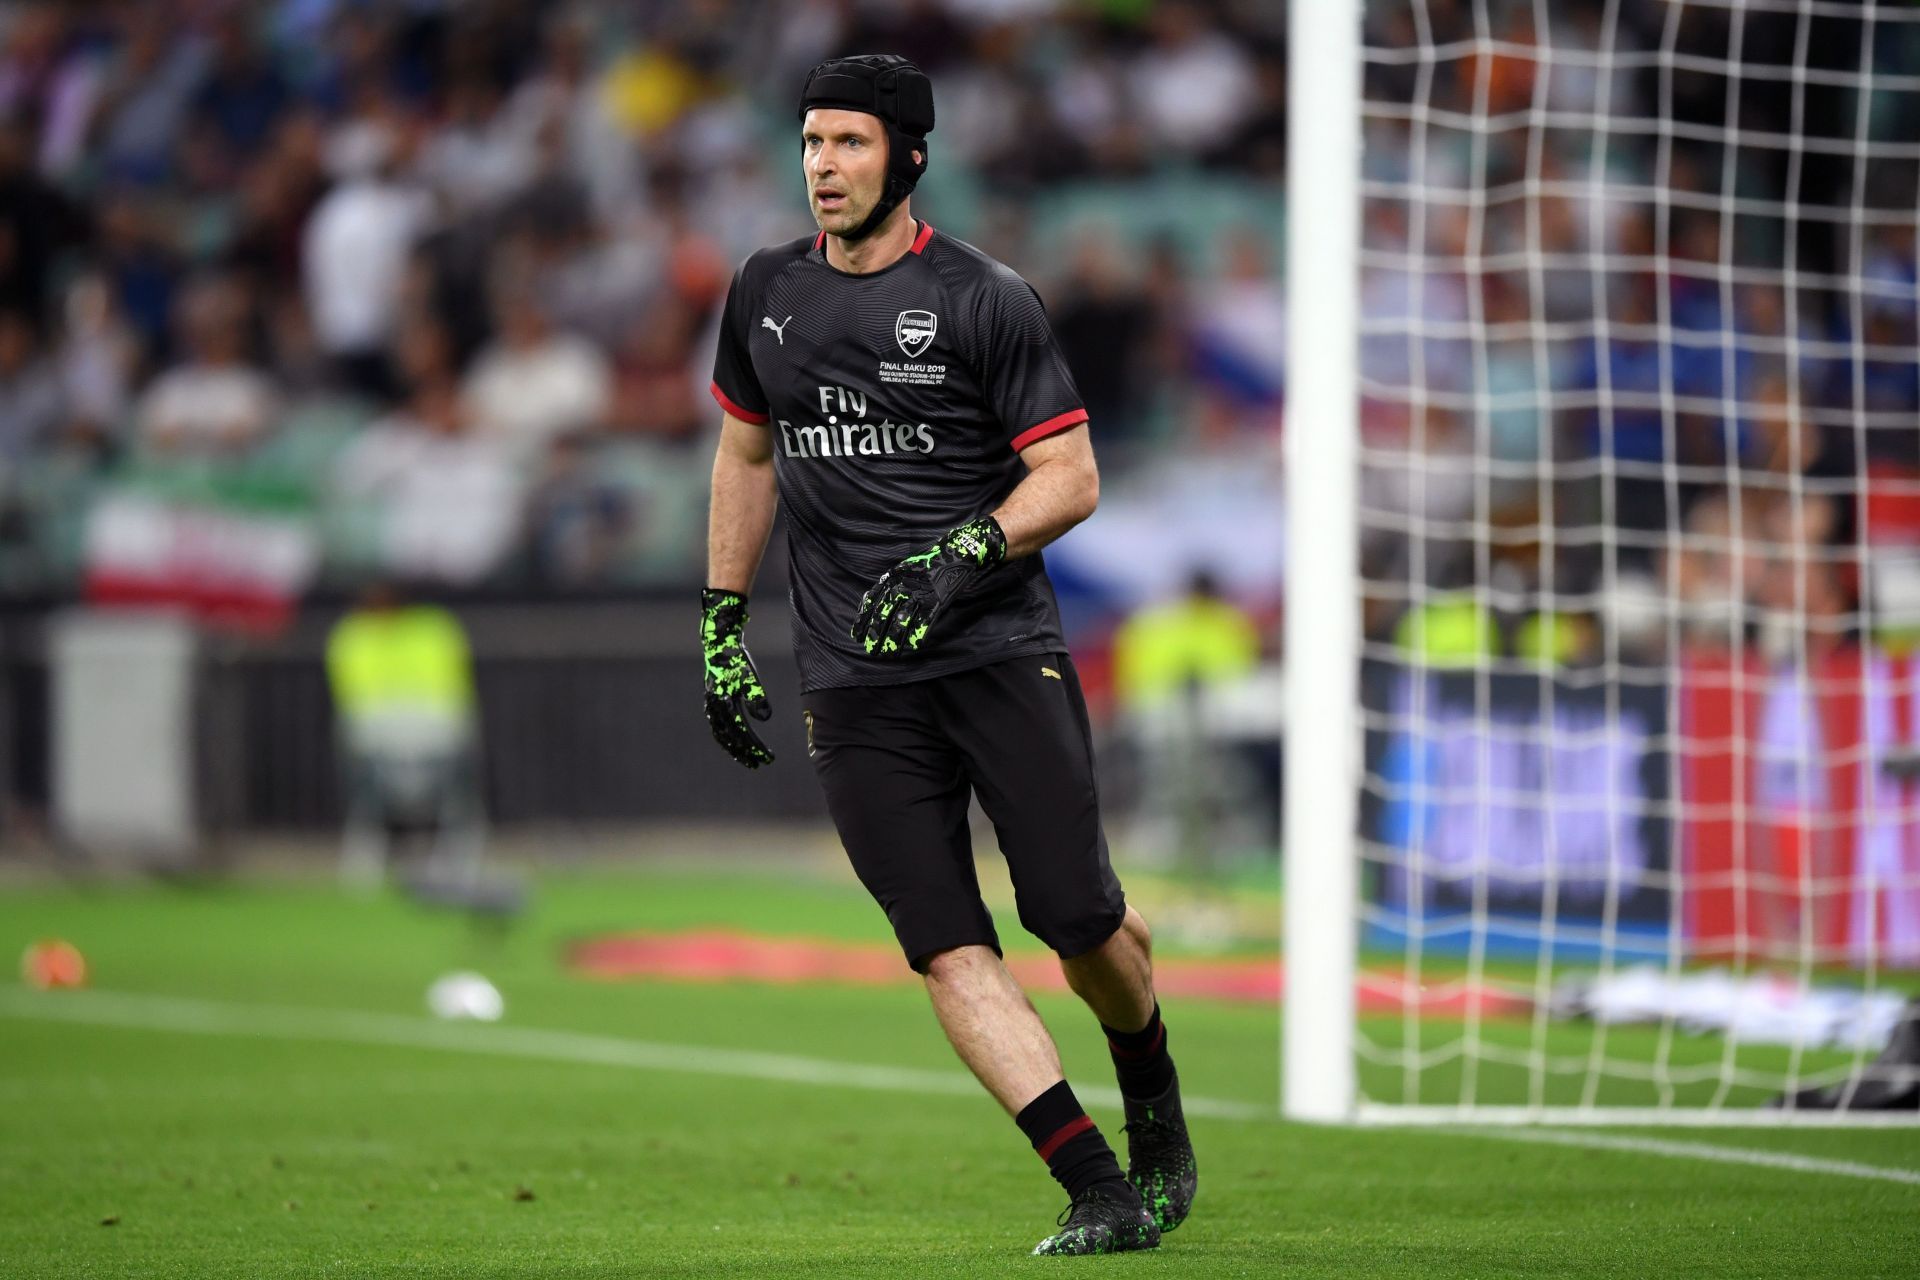 Petr Cech played his last game as an Arsenal player against Chelsea